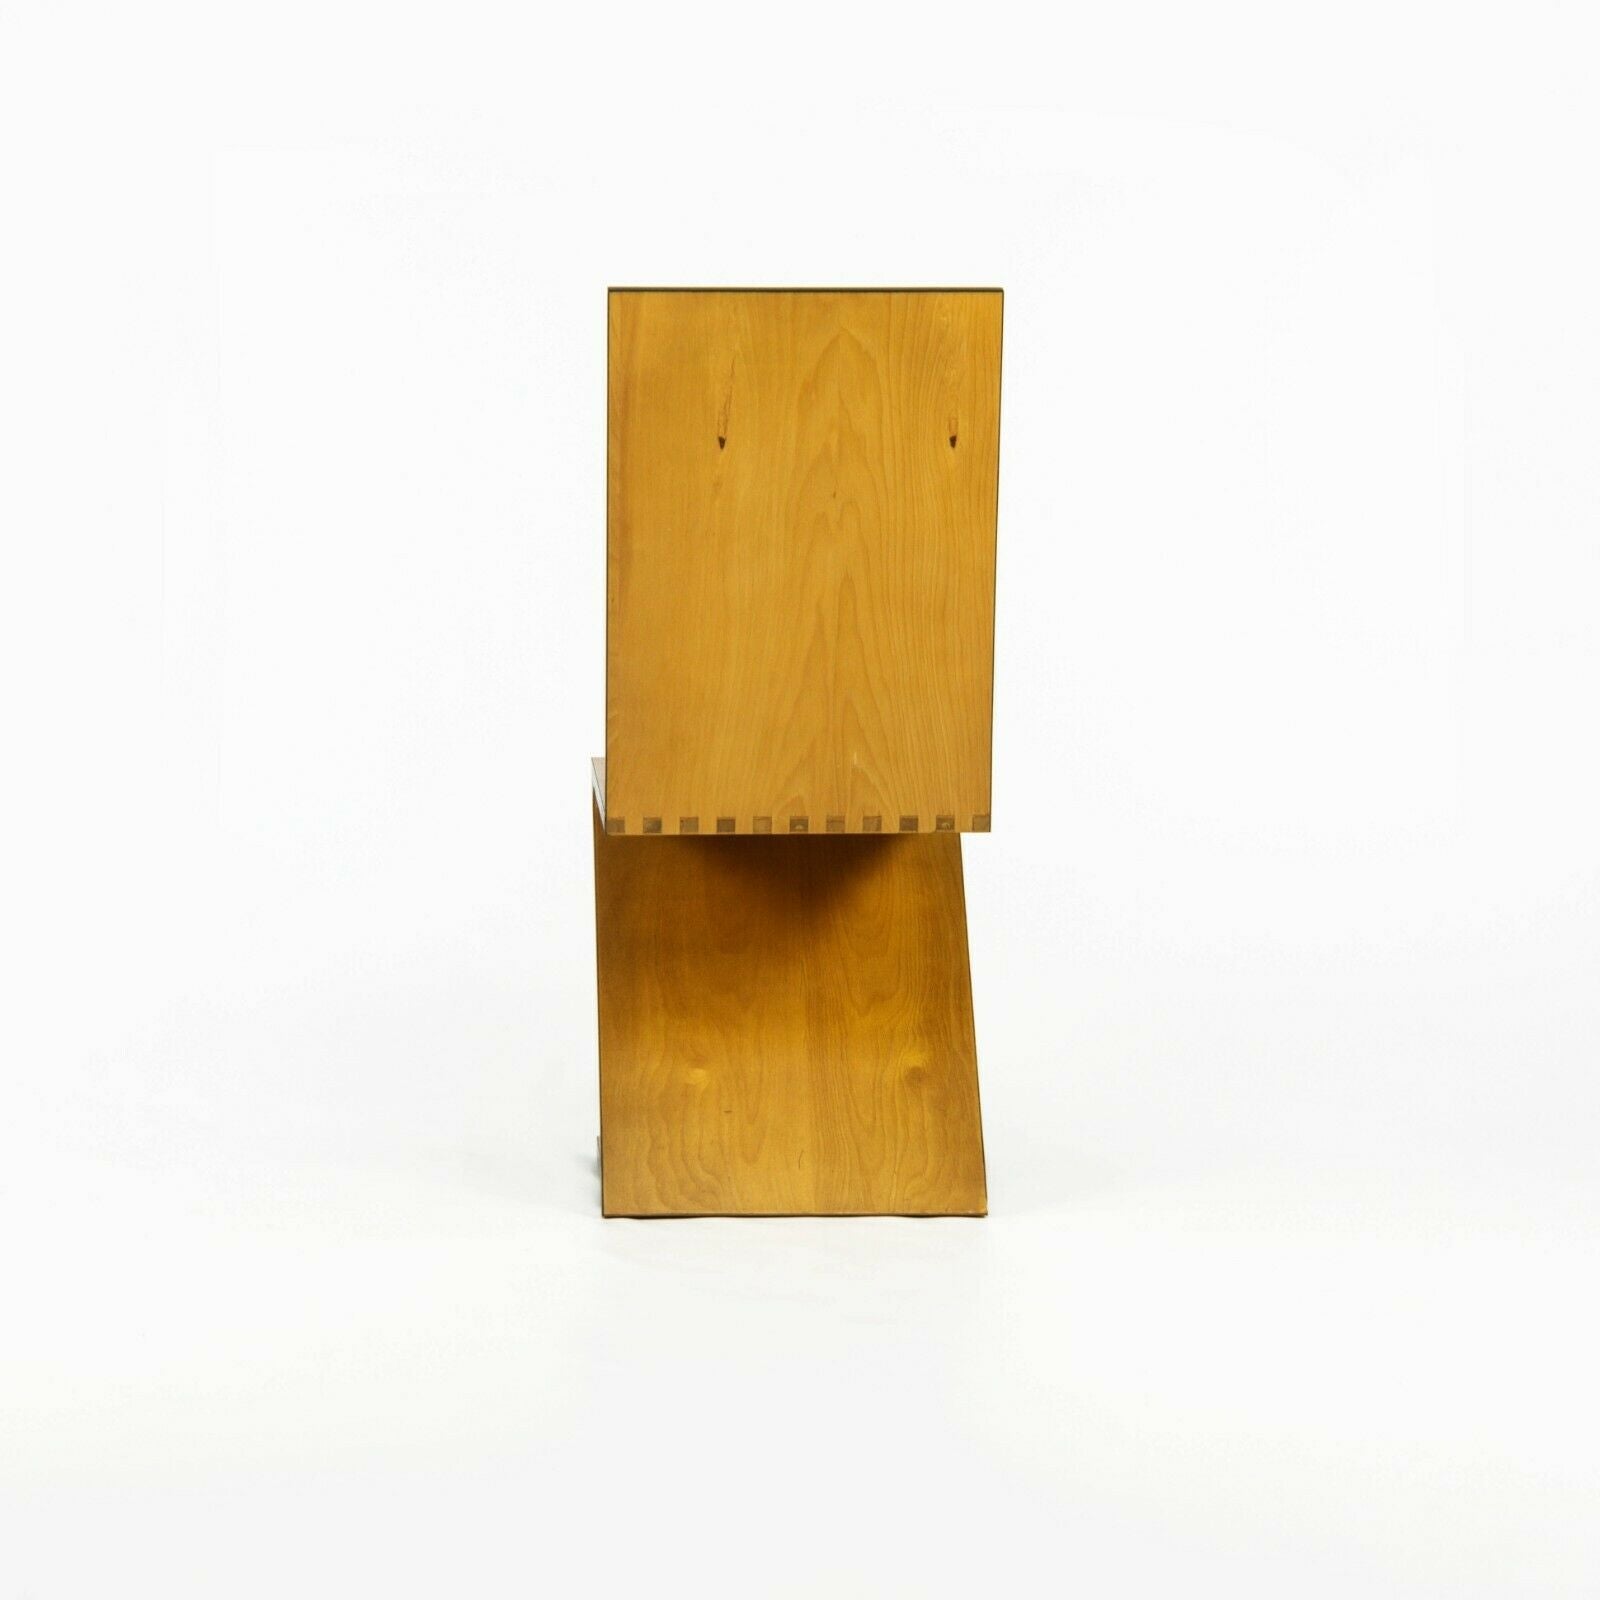 SOLD 1970s Set of Four Gerrit Thomas Rietveld Zig-Zag Chairs Unmarked in Cherry Wood